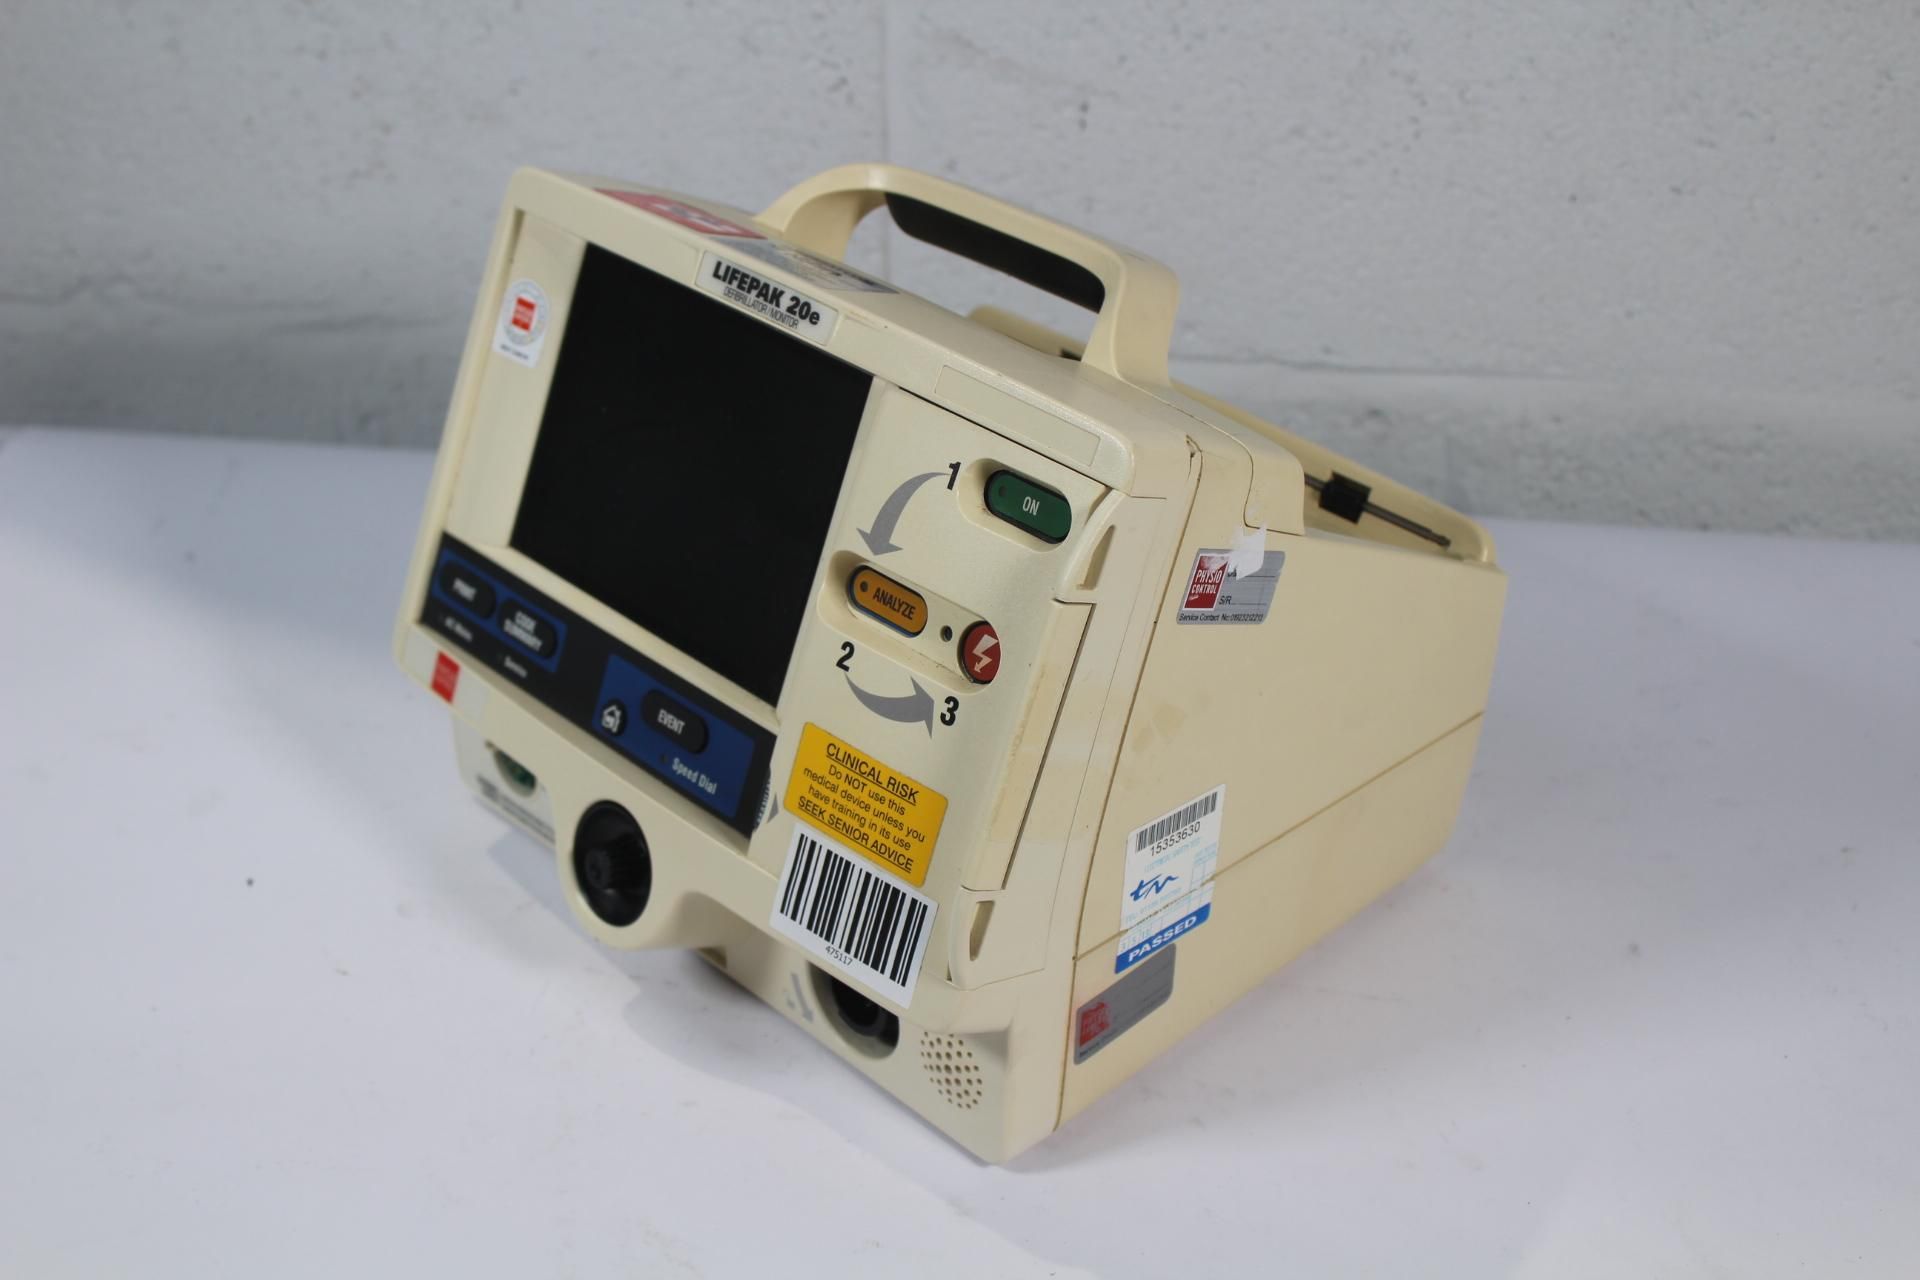 Medtronic Lifepak 20e Defibrillator/Monitor. Pre-owned. Item is untested and may be incomplete, View